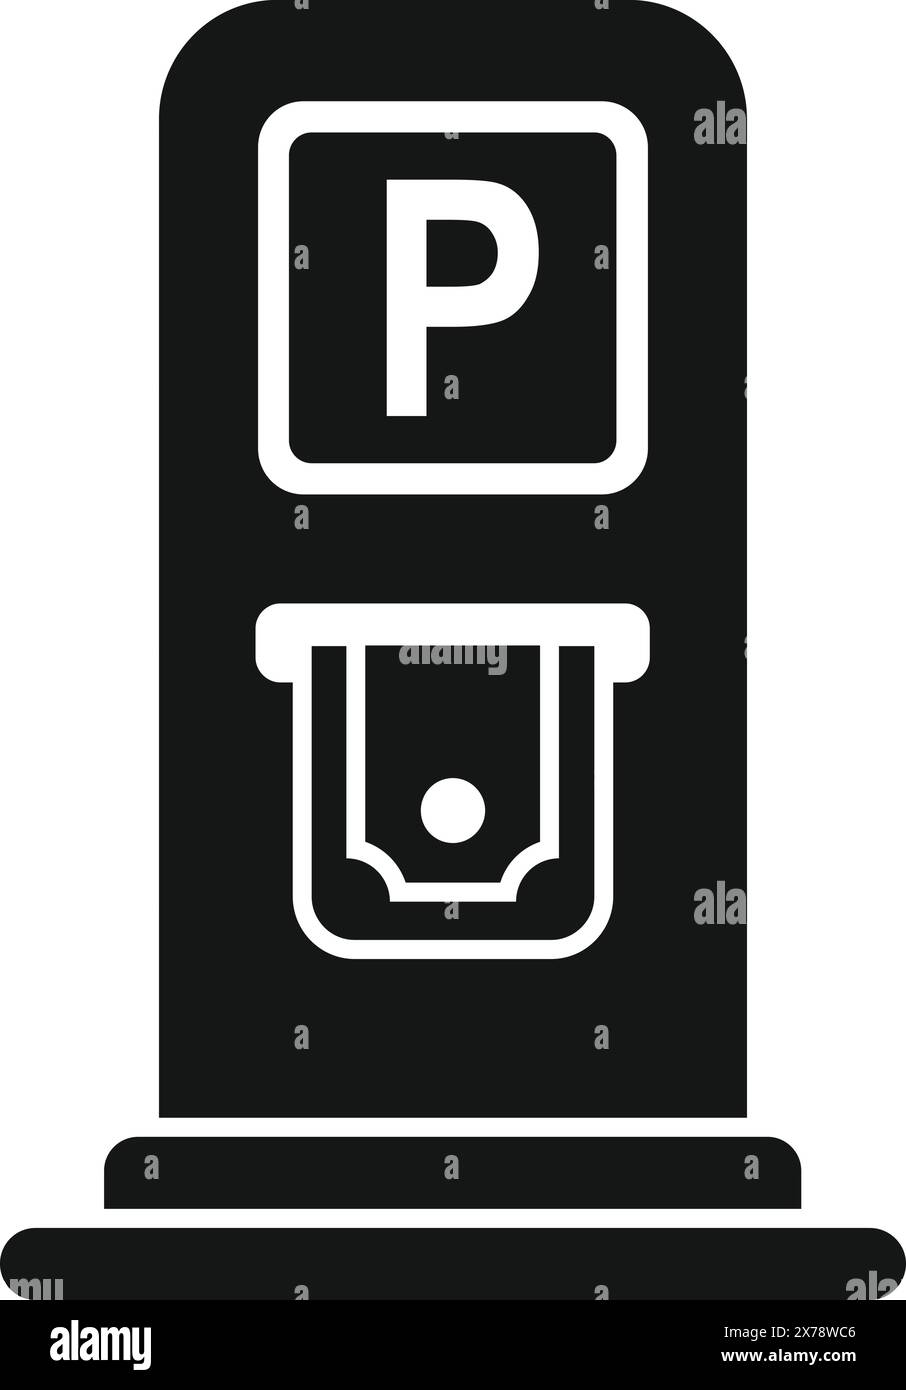 Vector illustration of a parking meter icon in a simple black and white design Stock Vector